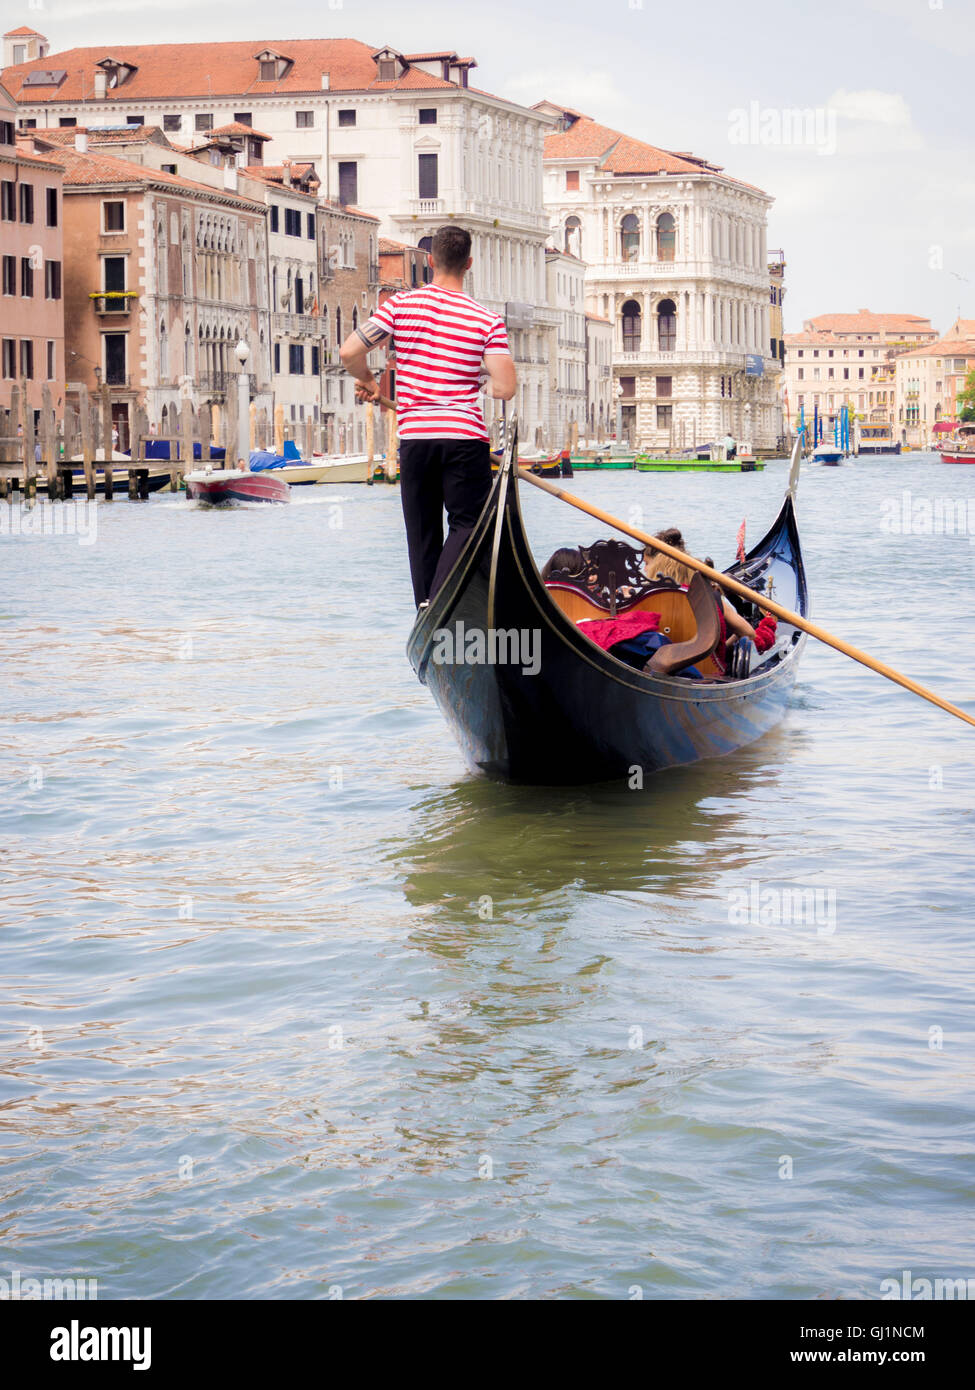 Gondola on the Grand Canal, with gondolier wearing a traditional striped top. Venice. Italy. Stock Photo